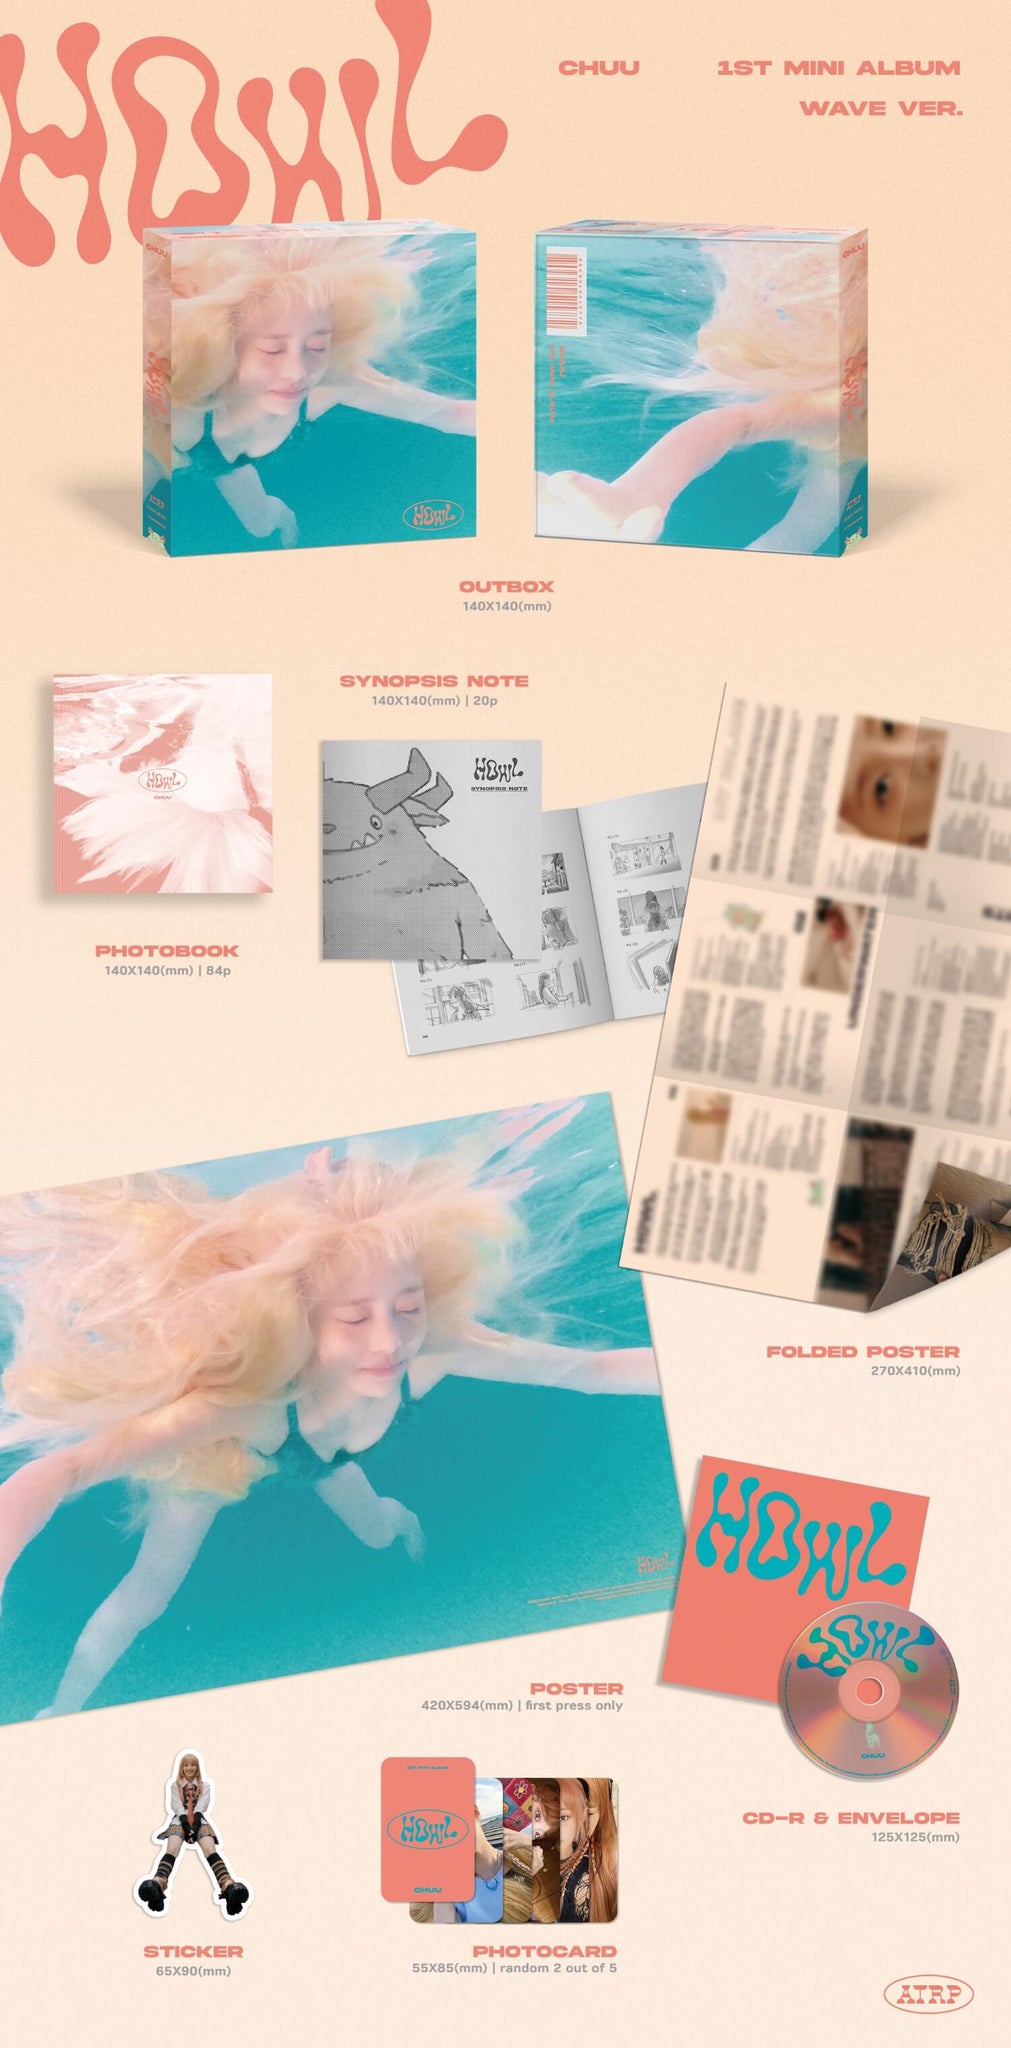 Chuu 1st Mini Album Howl WAVE Inclusions Out Box Photobook Synopsis Note CD Envelope Photocards Sticker Folded Poster 1st Press Poster